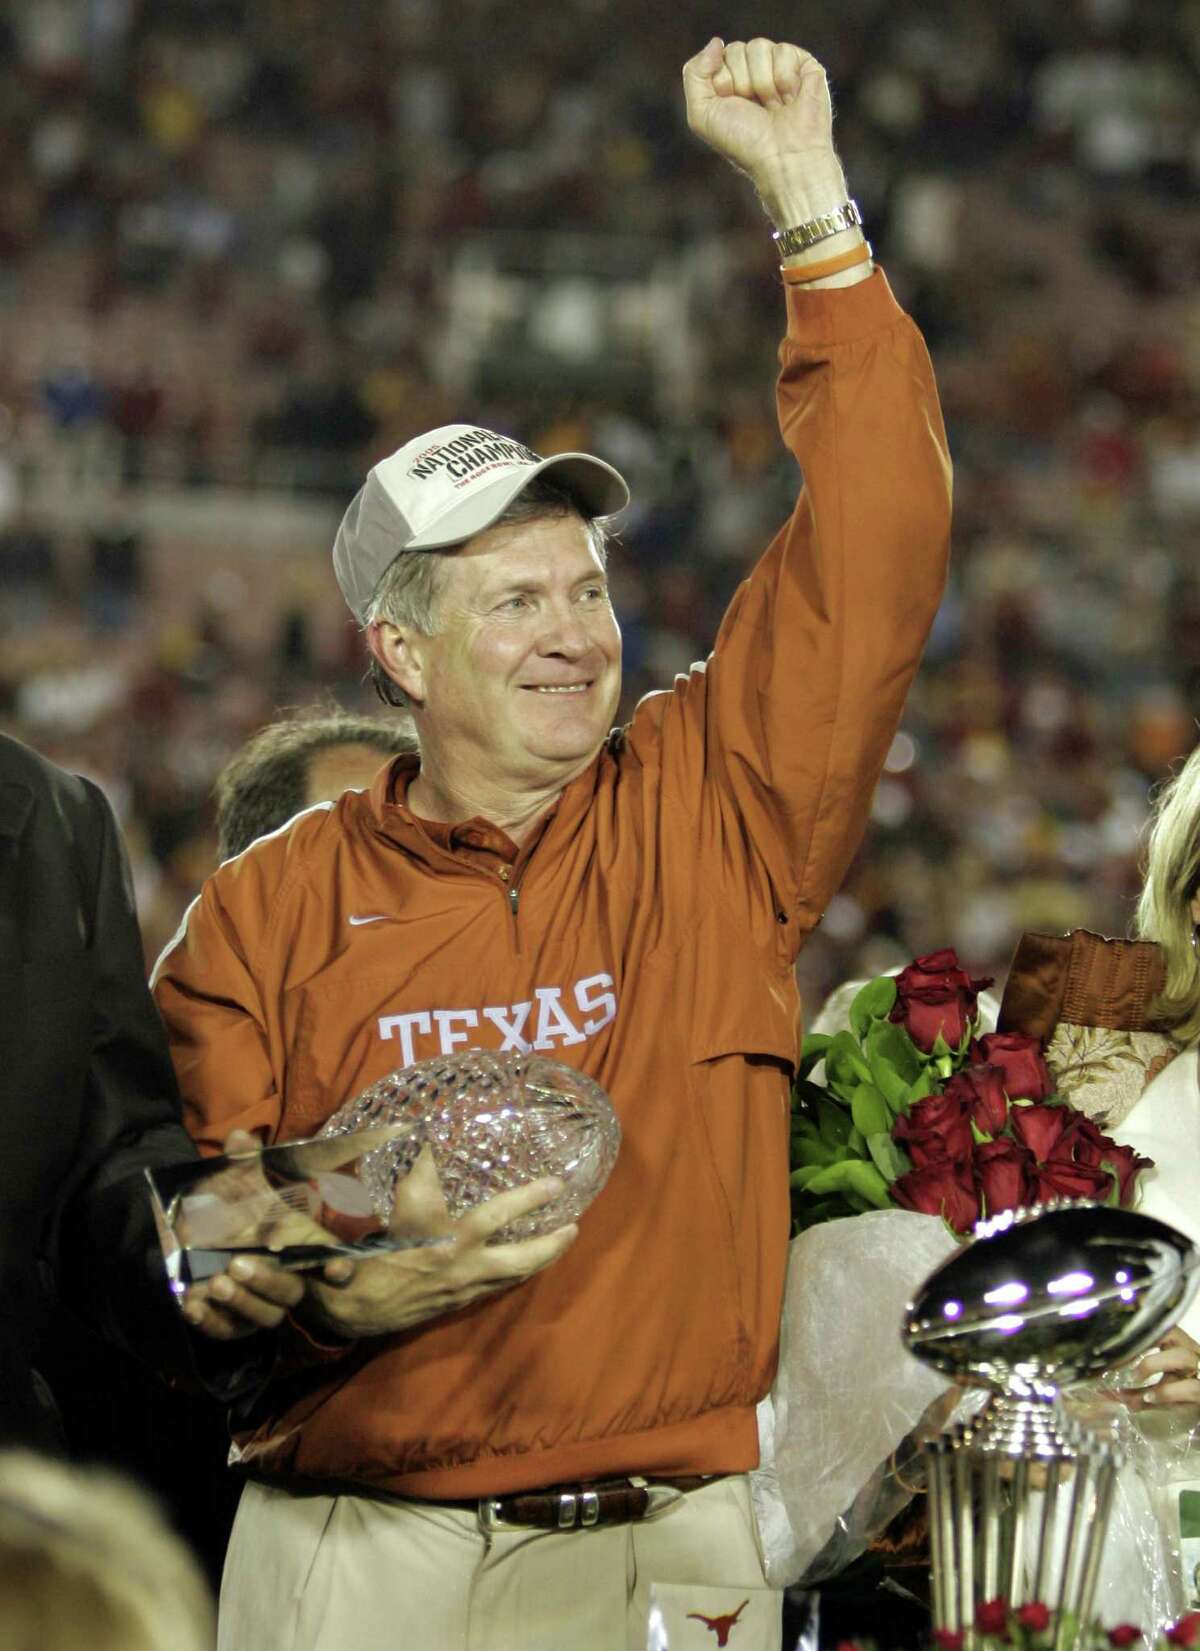 FILE - In this Jan. 4, 2006, file photo, Texas head coach Mack Brown celebrates with the championship trophy after Texas beat Southern California 41-38 in the Rose Bowl, the national championship college football game in Pasadena, Calif. Brown has stepped down as coach and that the Alamo Bowl against Oregon on Dec. 30 will be his last game with the Longhorns, the school announced Saturday, Dec. 14, 2013. (AP Photo/ Mark J. Terrill, File)